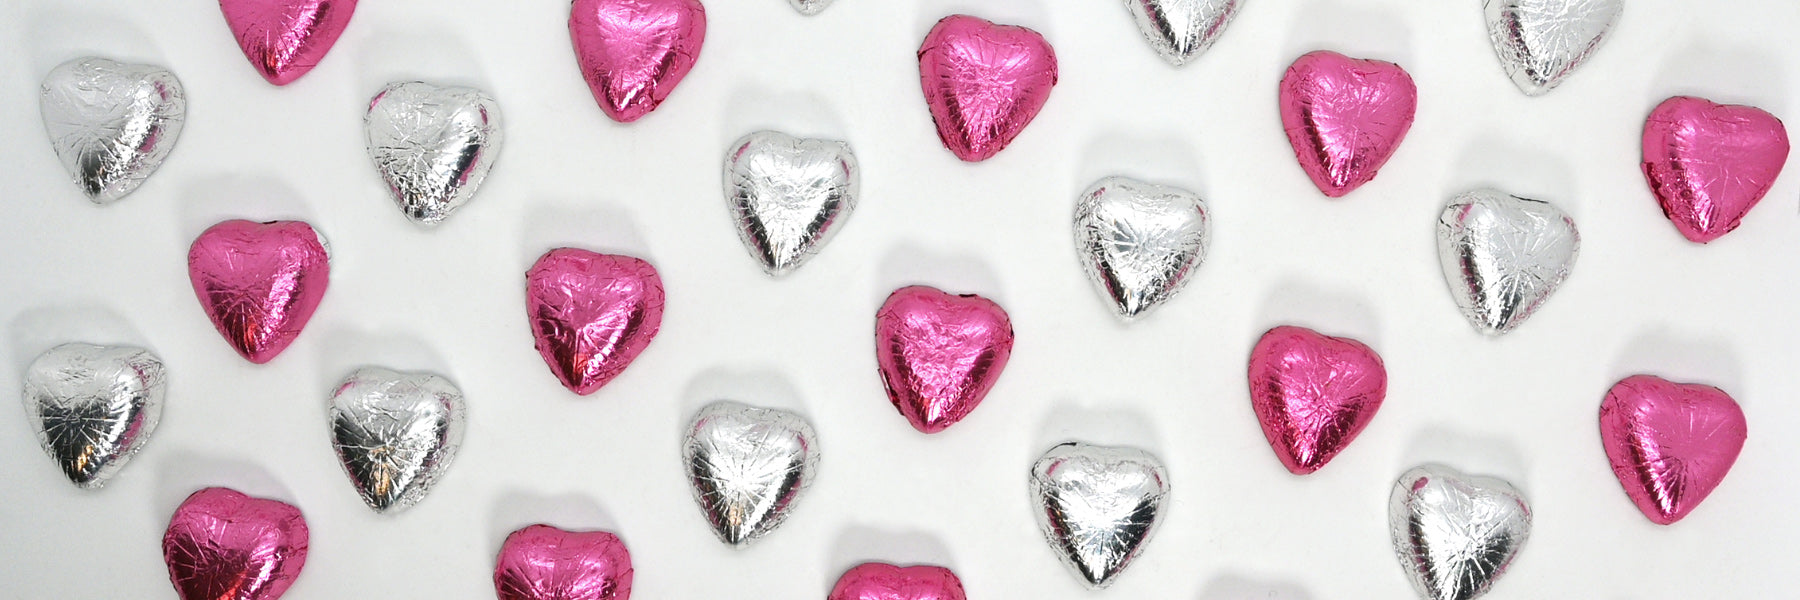 Dilettante Chocolates Pink and Silver Foil Chocolate Hearts